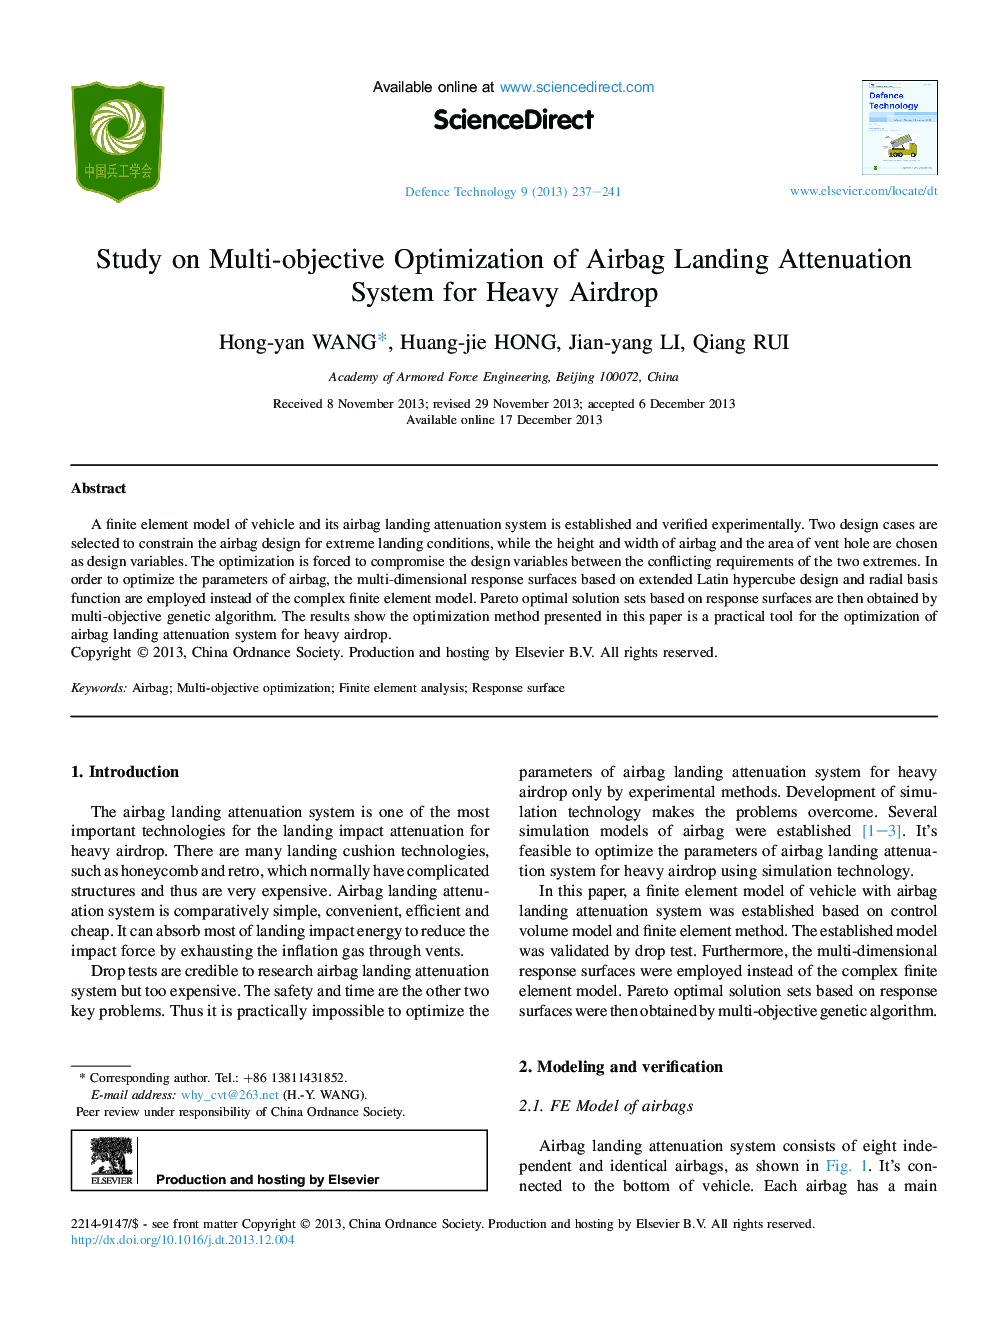 Study on Multi-objective Optimization of Airbag Landing Attenuation System for Heavy Airdrop 